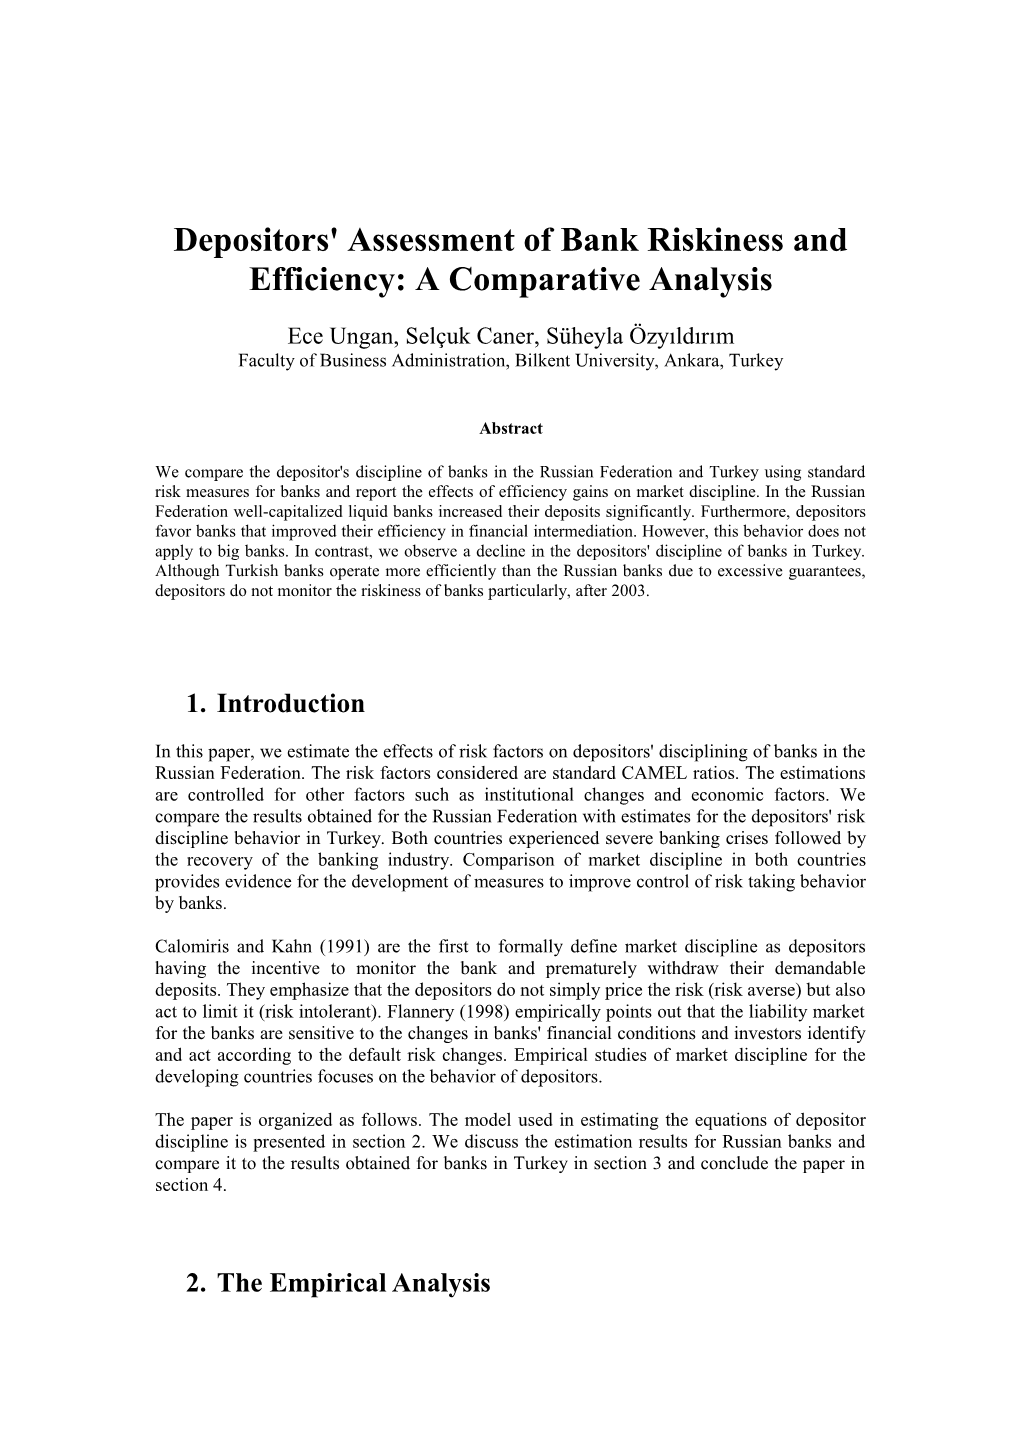 Depositors' Assessment of Bank Riskiness and Efficiency: a Comparative Analysis